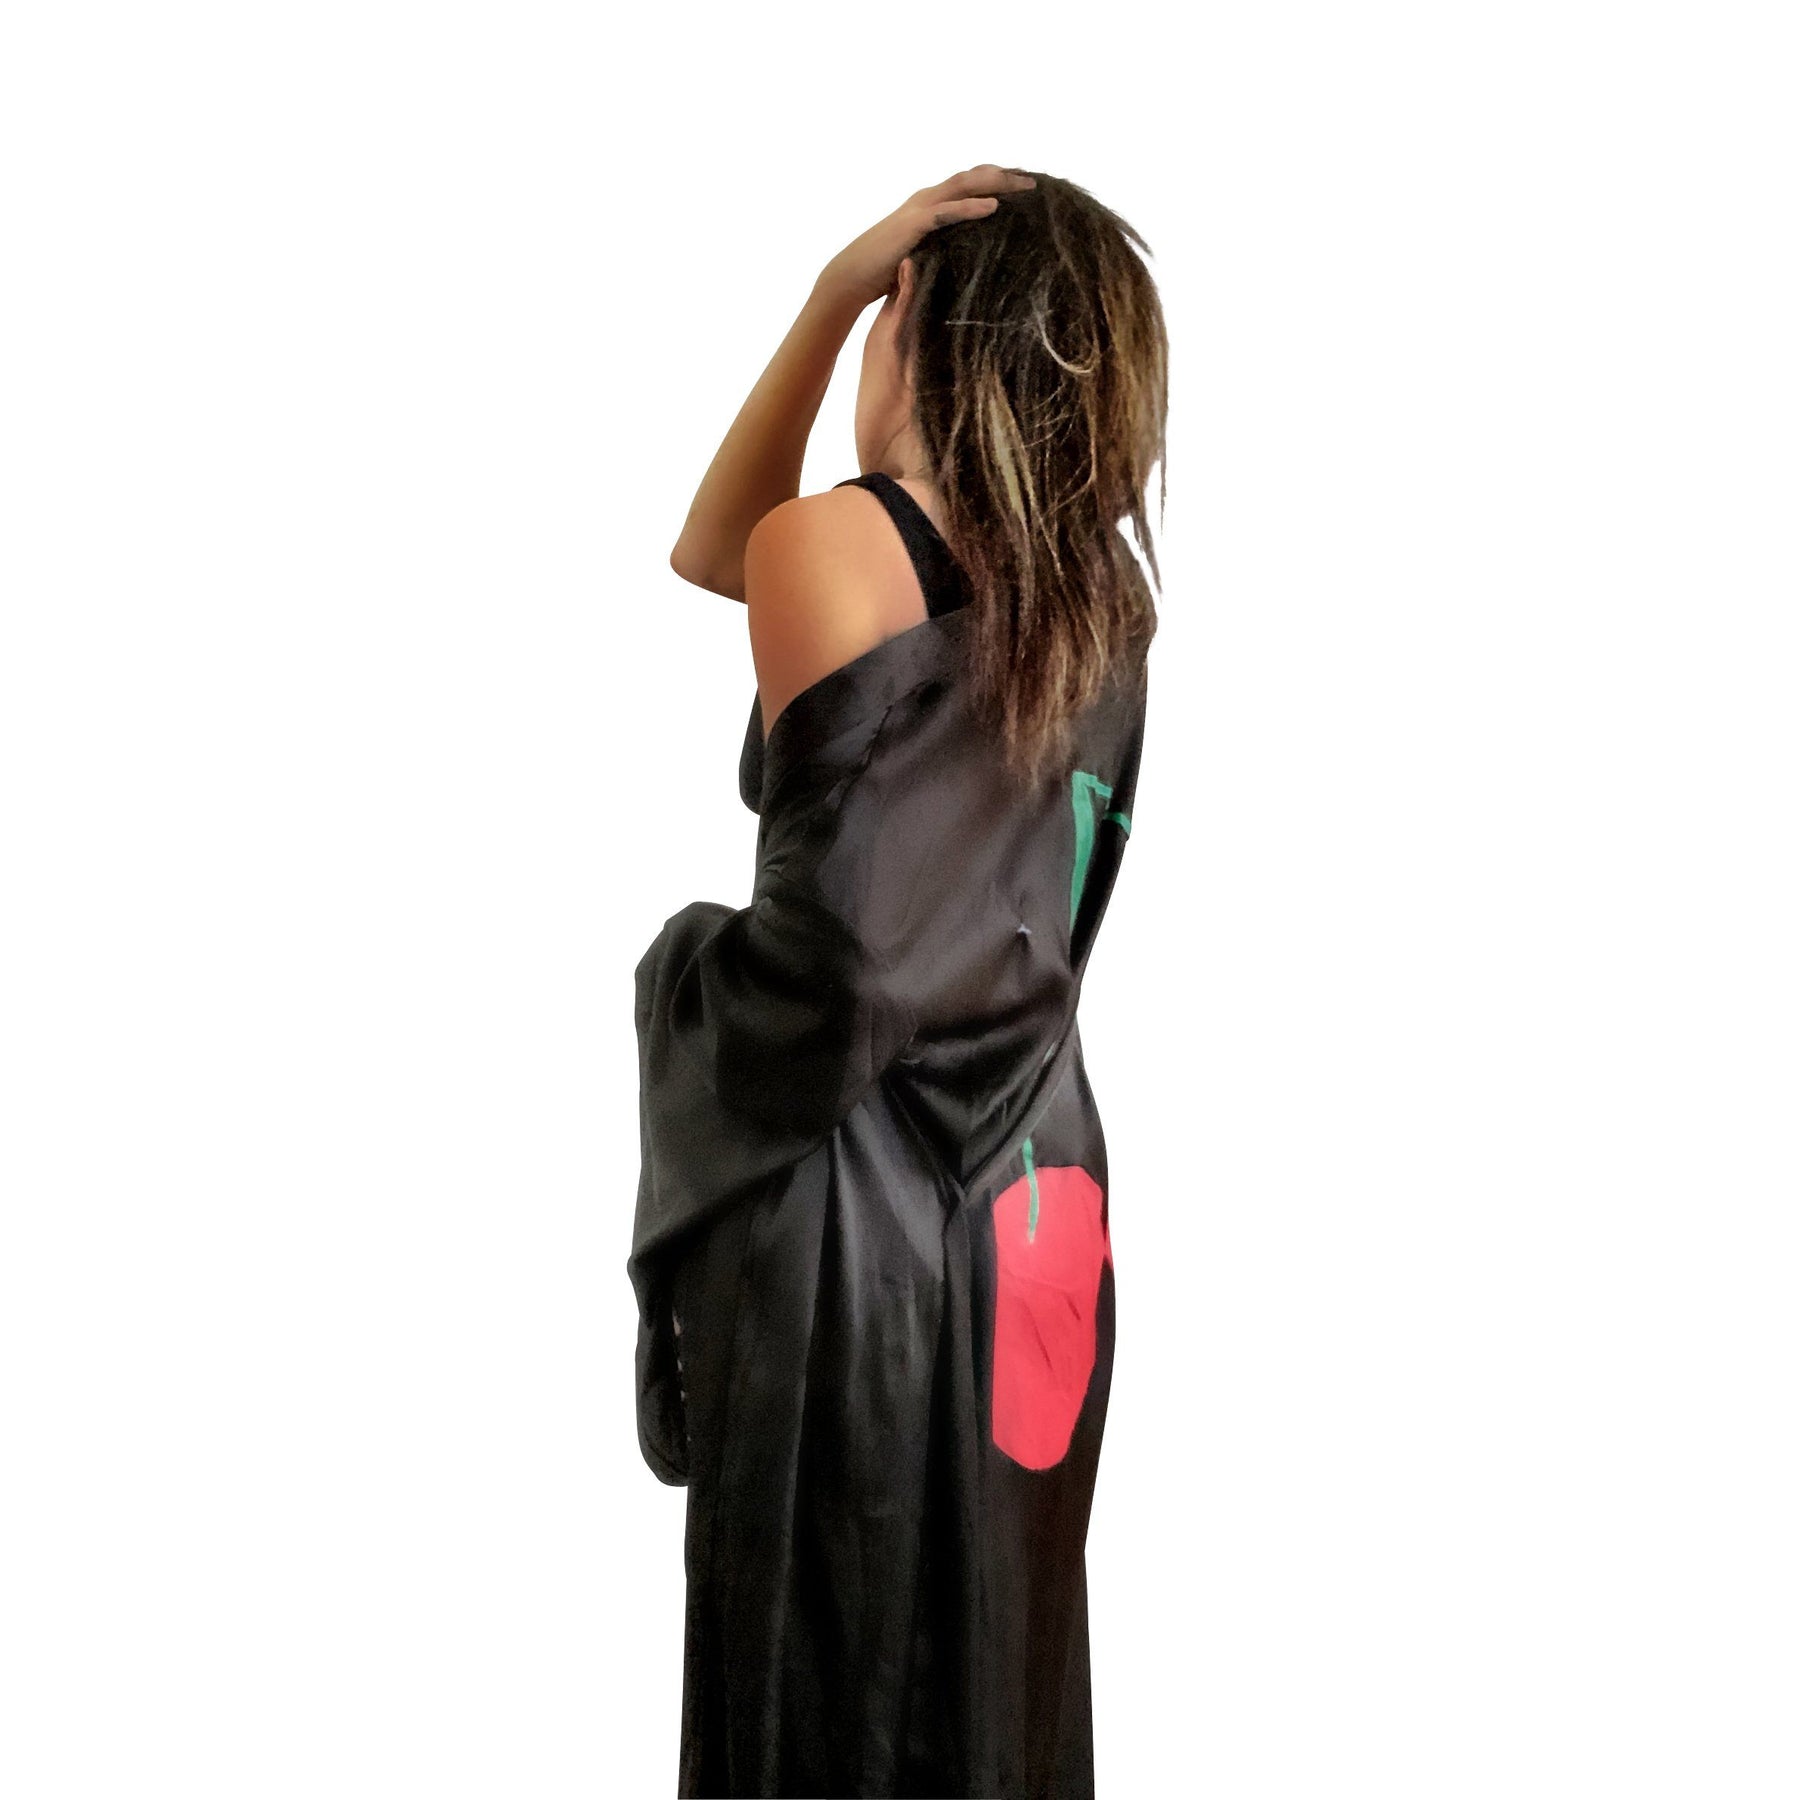 Black, super soft, satin long kimono robe. Pair of cherries painted in back in in red and green. Belted, with bell sleeves. Signed @wrenandglory.